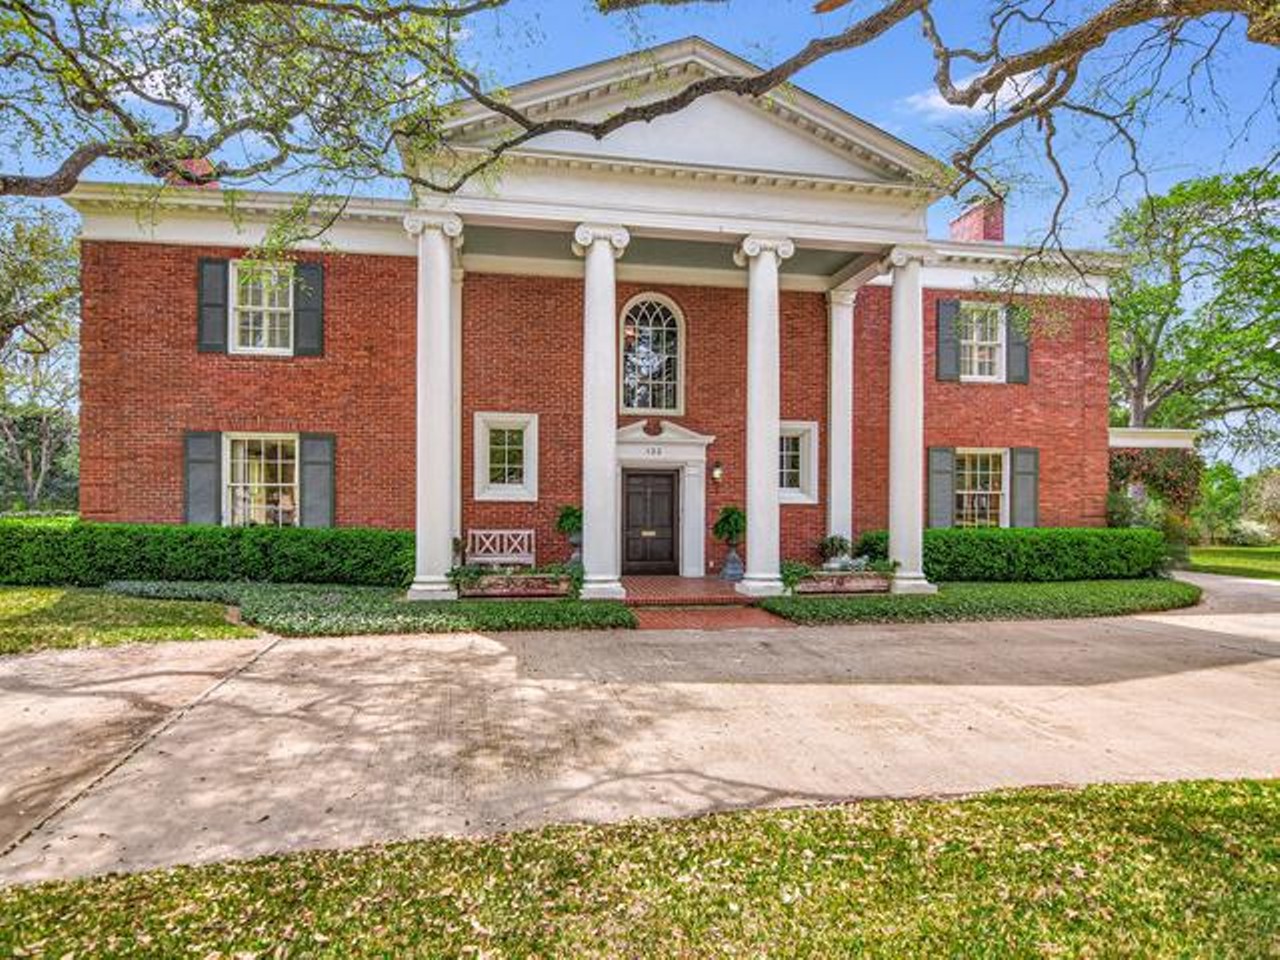 The architect of the McNay and San Antonio's first skyscraper designed this 1932 mansion